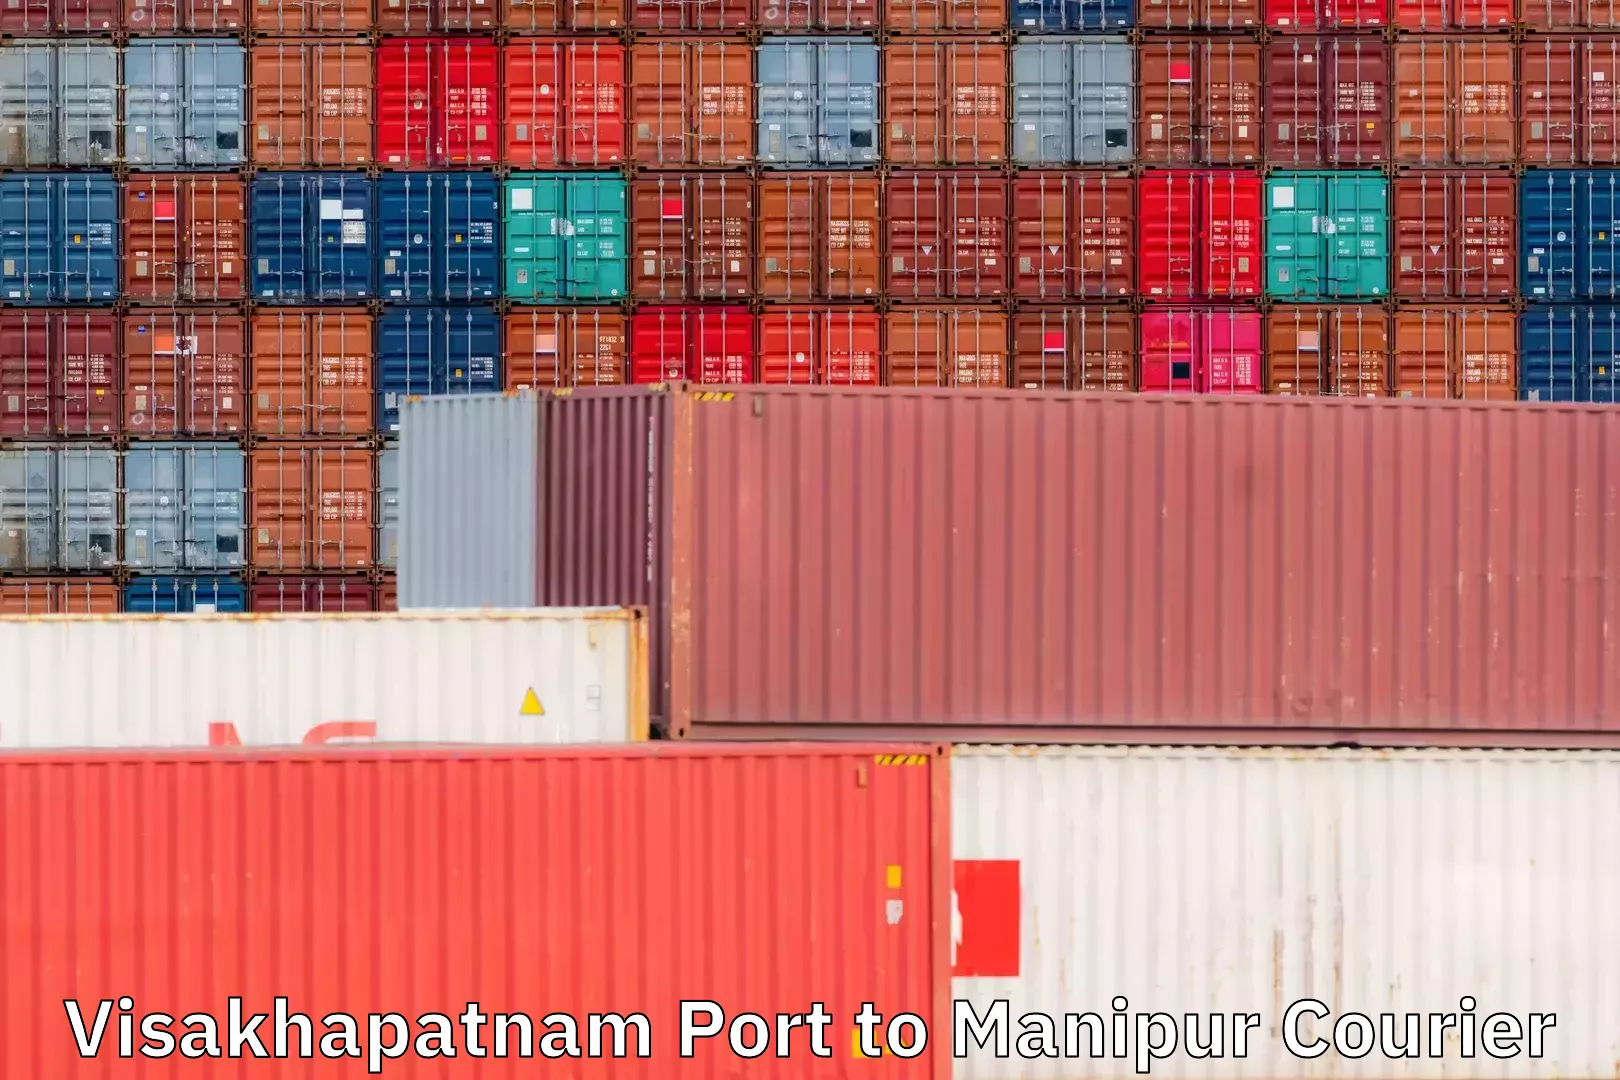 Courier service innovation Visakhapatnam Port to Manipur